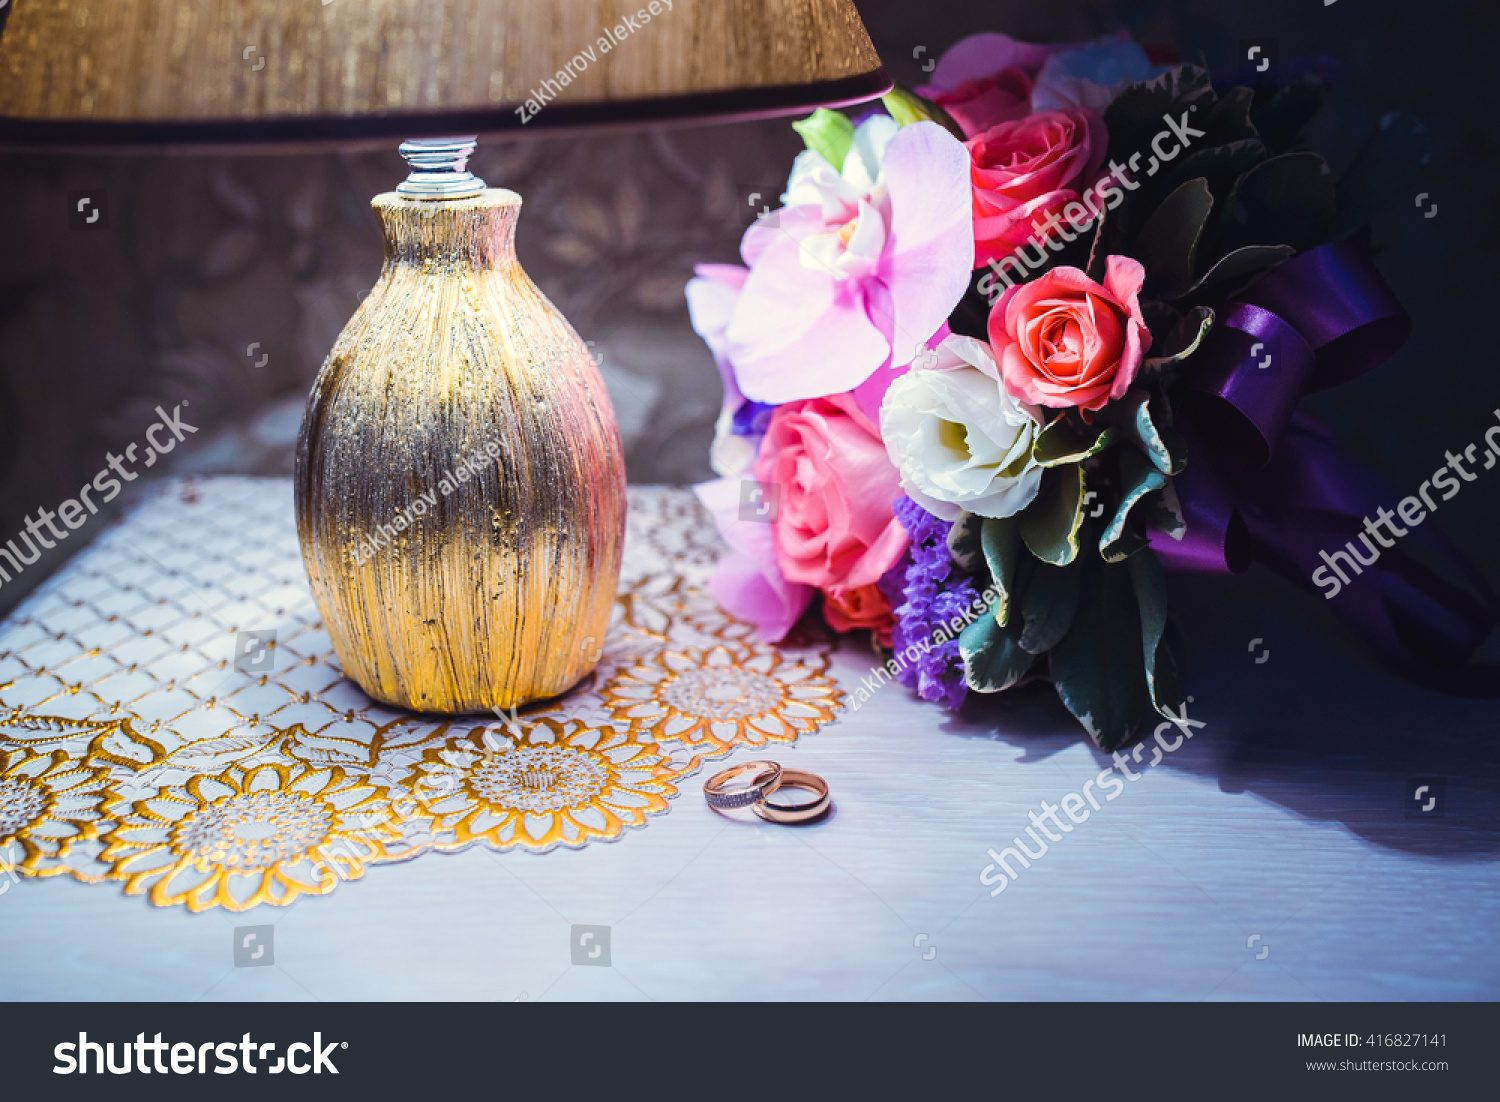 still life with wedding bouquet and rings #416827141